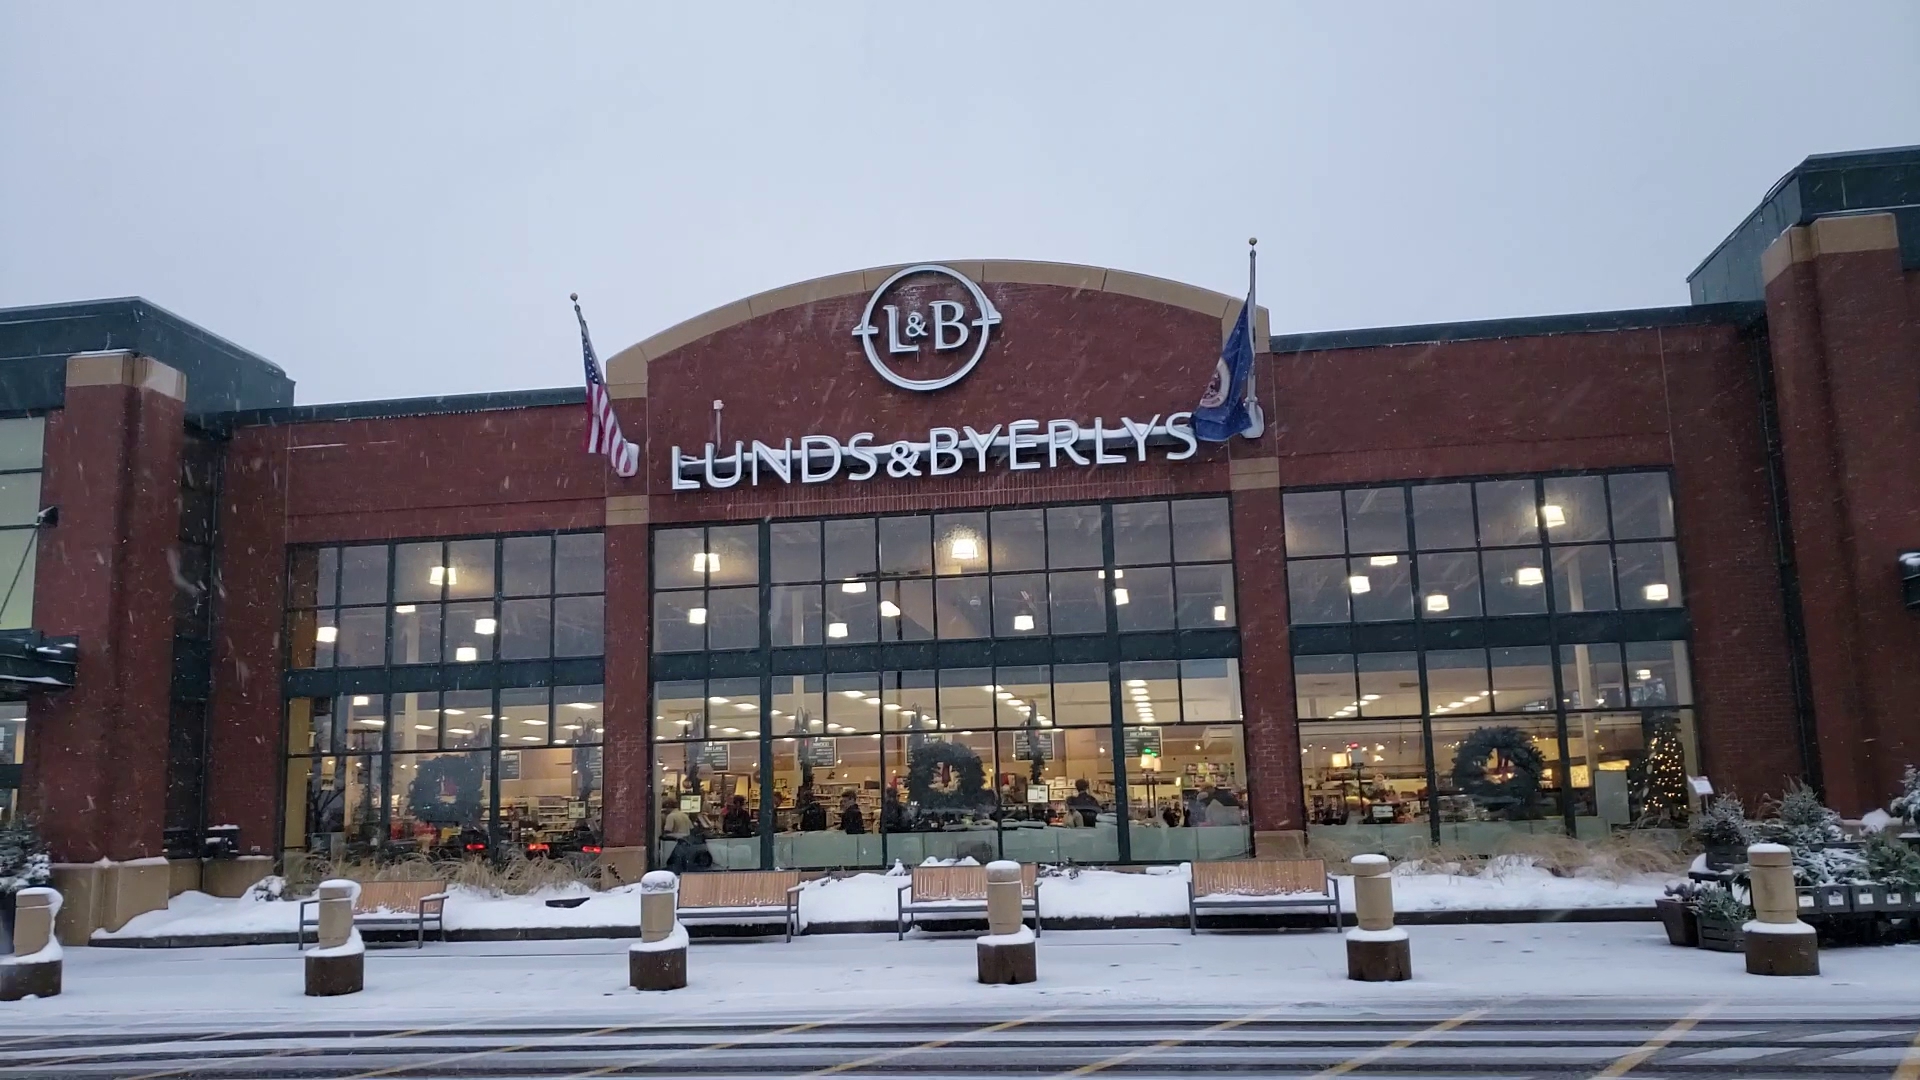 Lunds & Byerlys Plymouth